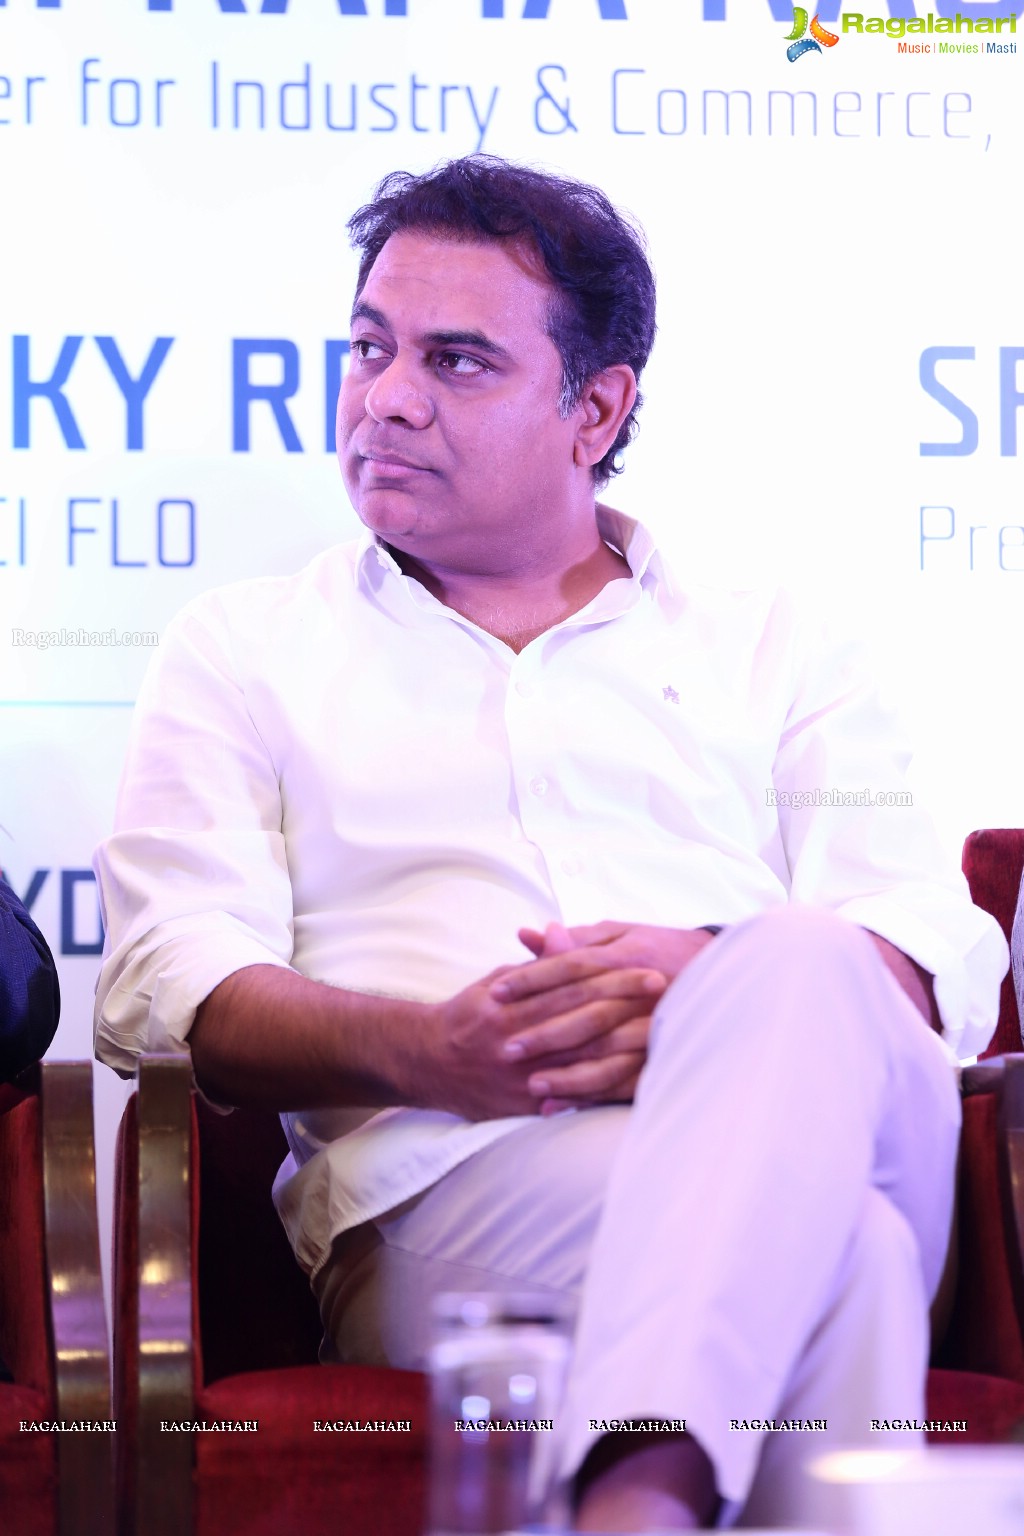 KT Rama Rao launches FLO TSIIC Industrial Park and handed over land allotment letters to 18 FLO Women Entrepreneurs